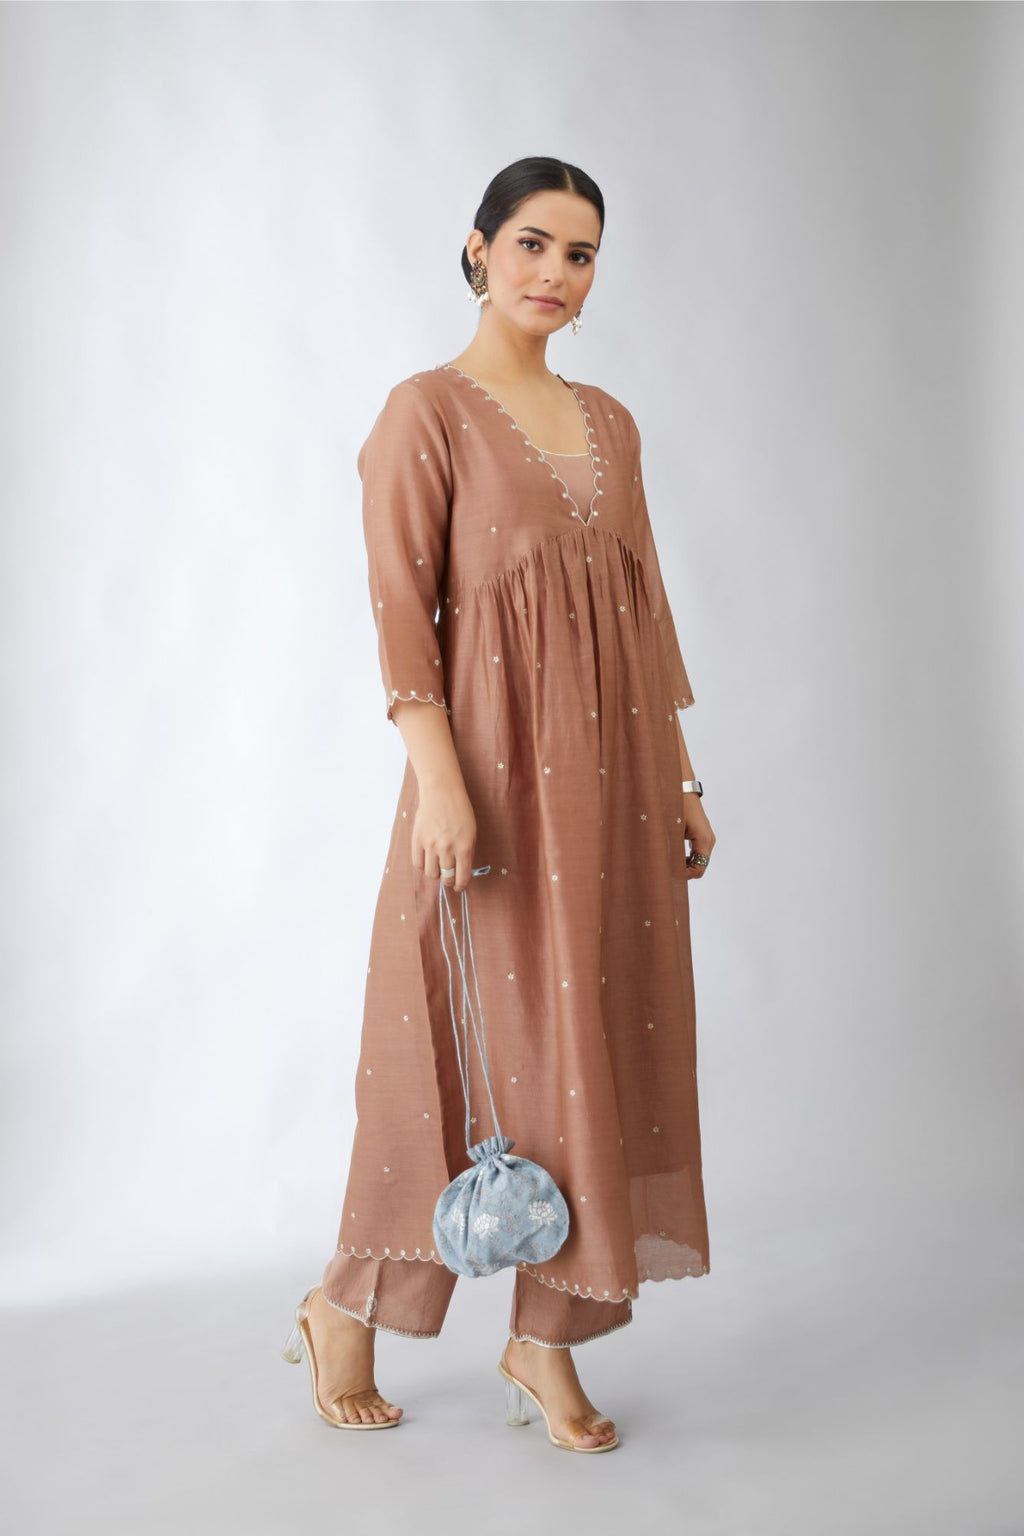 Pecan brown silk chanderi kurta set with delicate silver zari flowers and scalloped edges highlighted with hand attached mirrors.